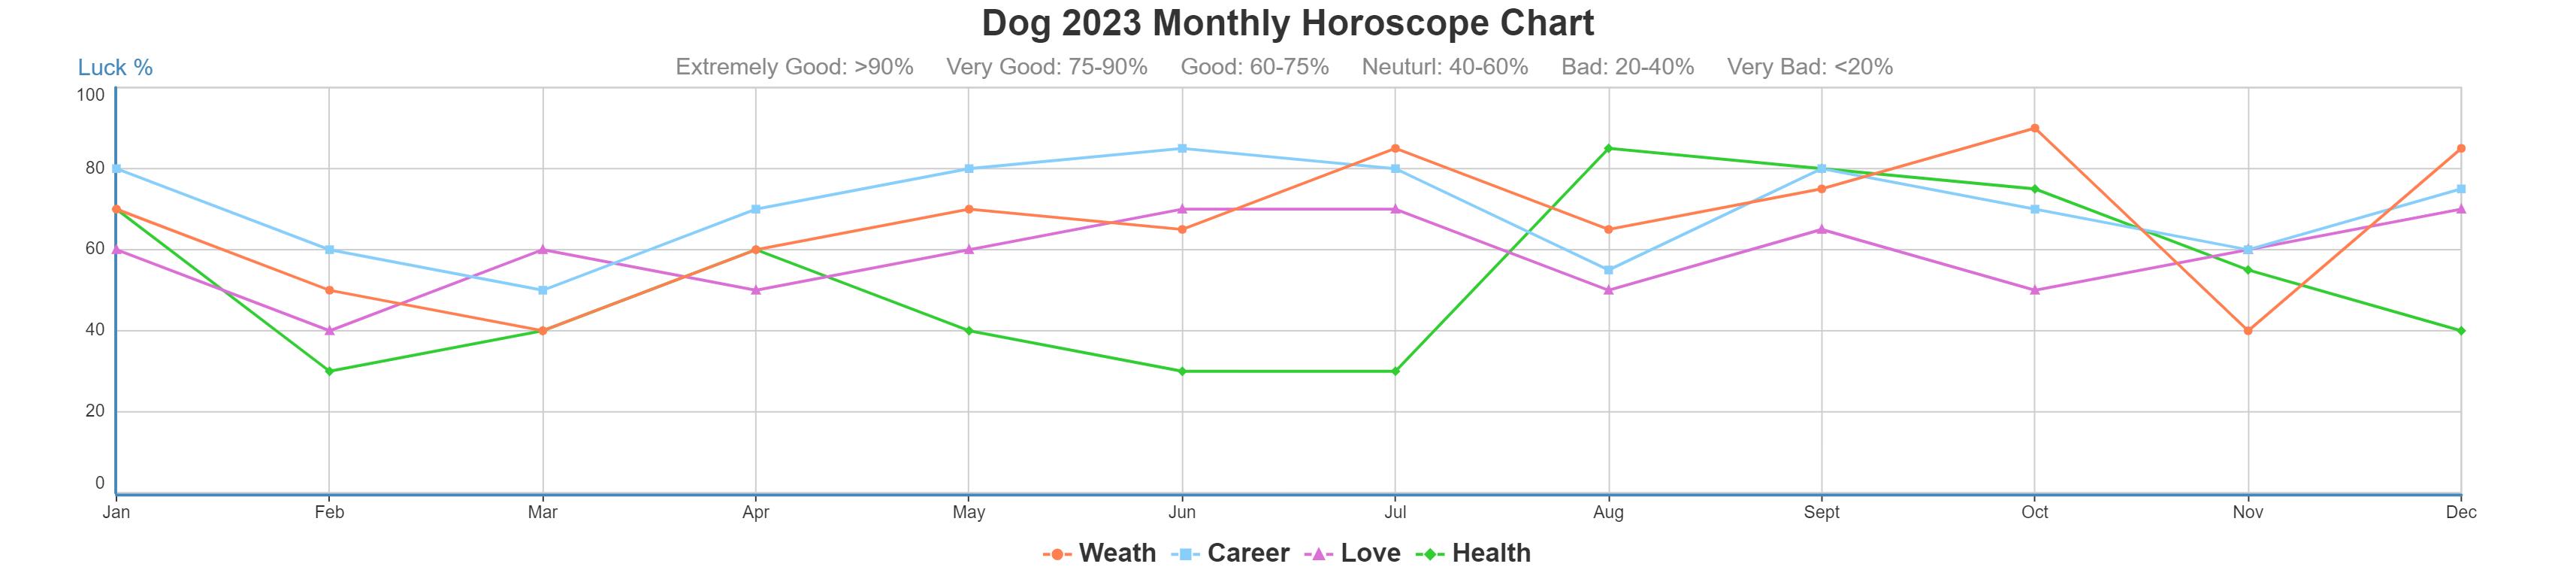 Chinese Horoscope for Dog, 2023/2024 Dog Yearly and Monthly Predictions